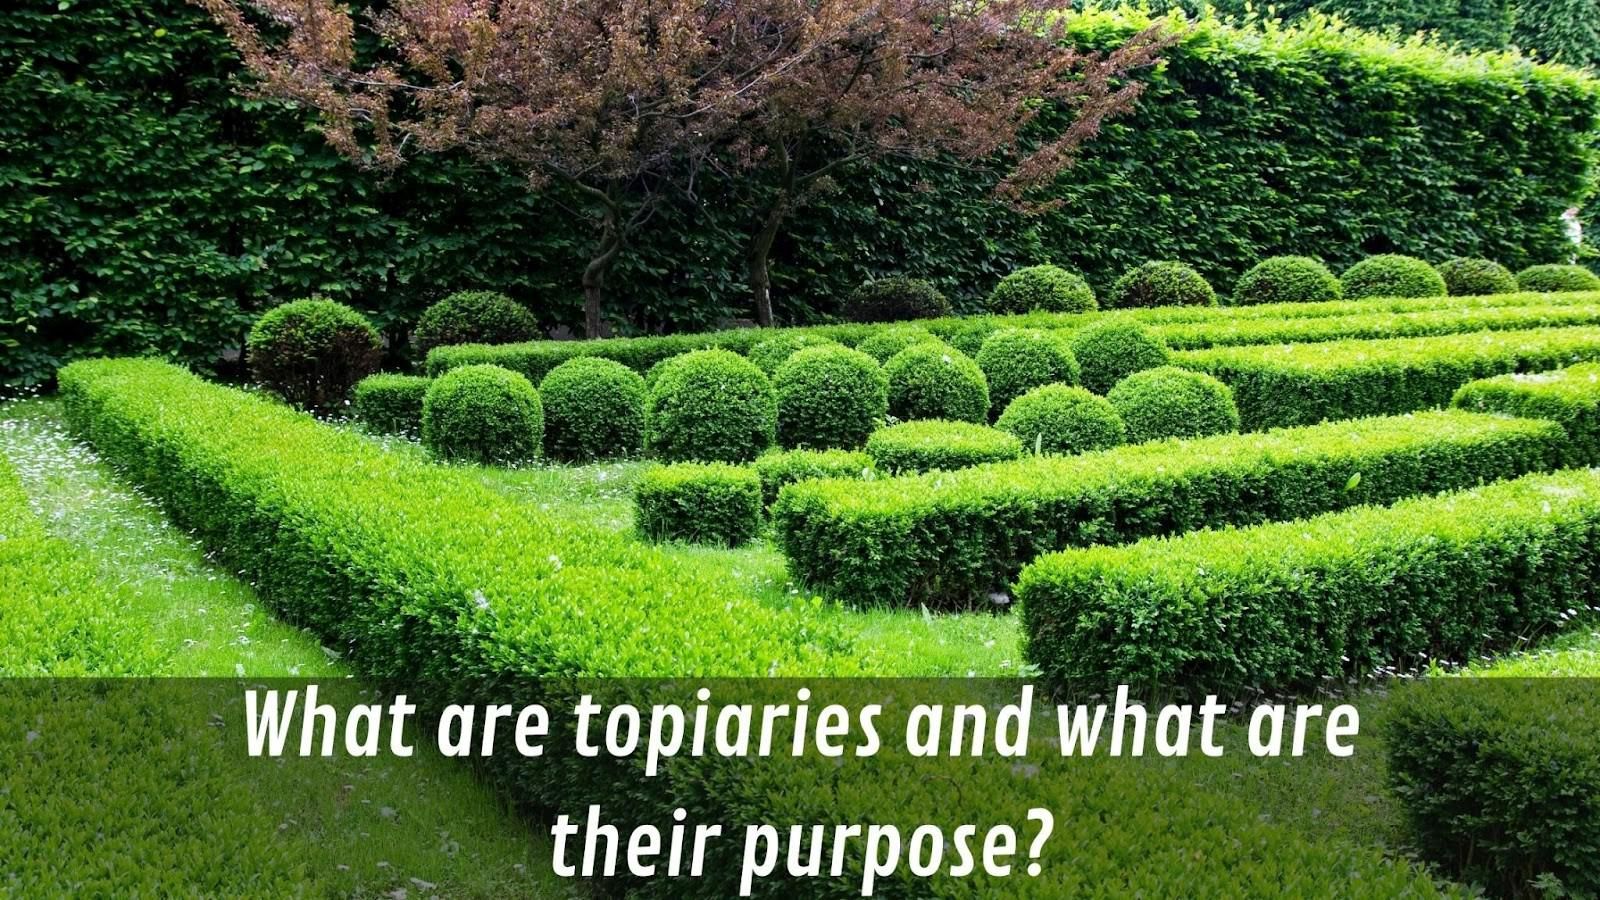 What Are Topiaries And What Are Their Purposes?